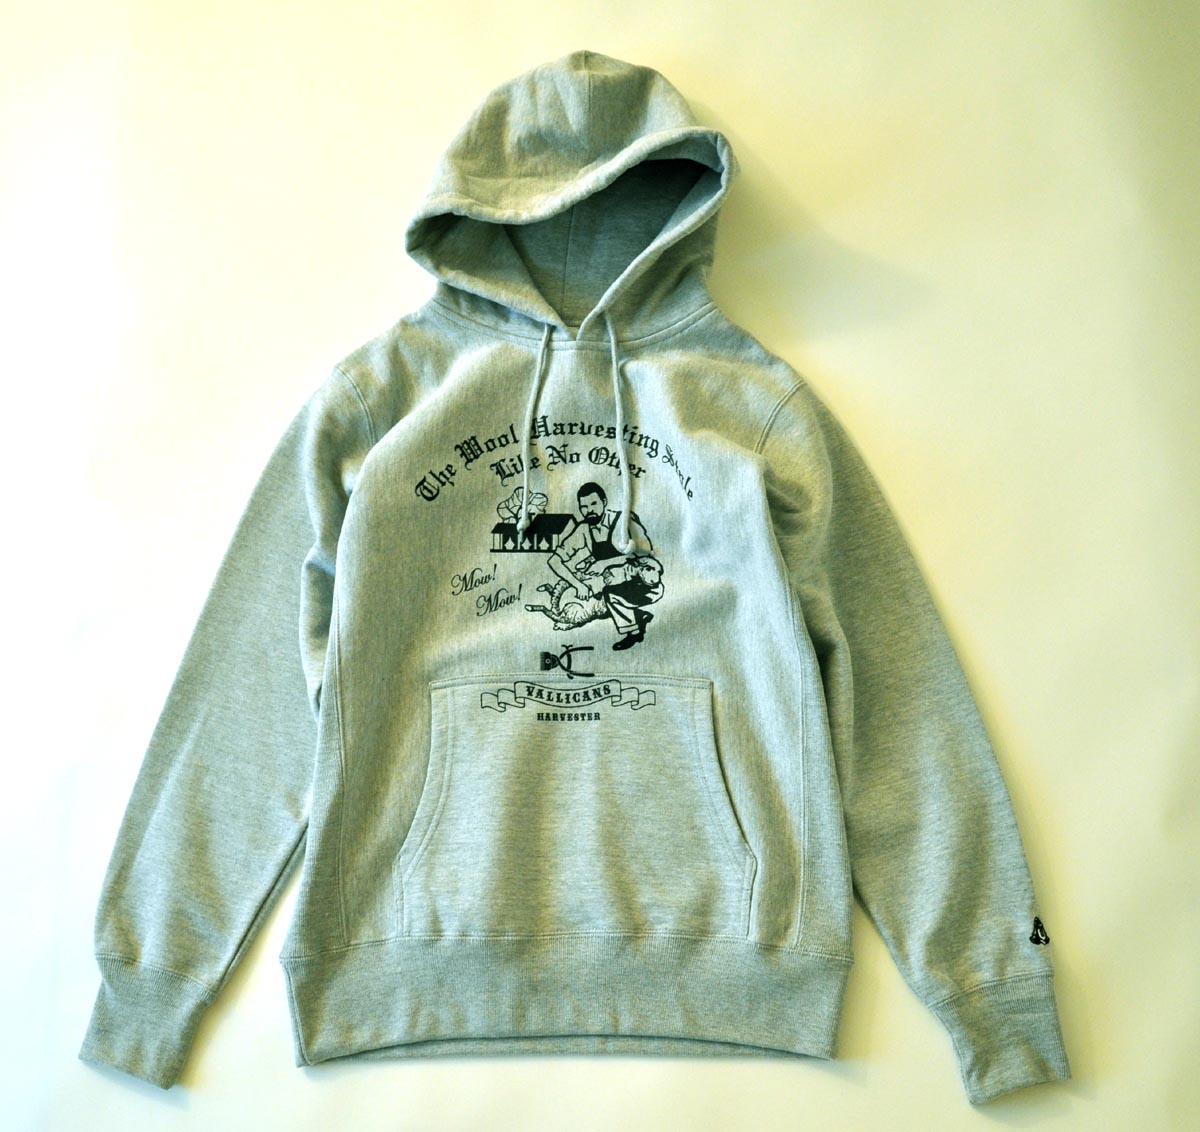 MowMOW Vallicans Parka 販売開始のお知らせ_a0152253_17252890.jpg